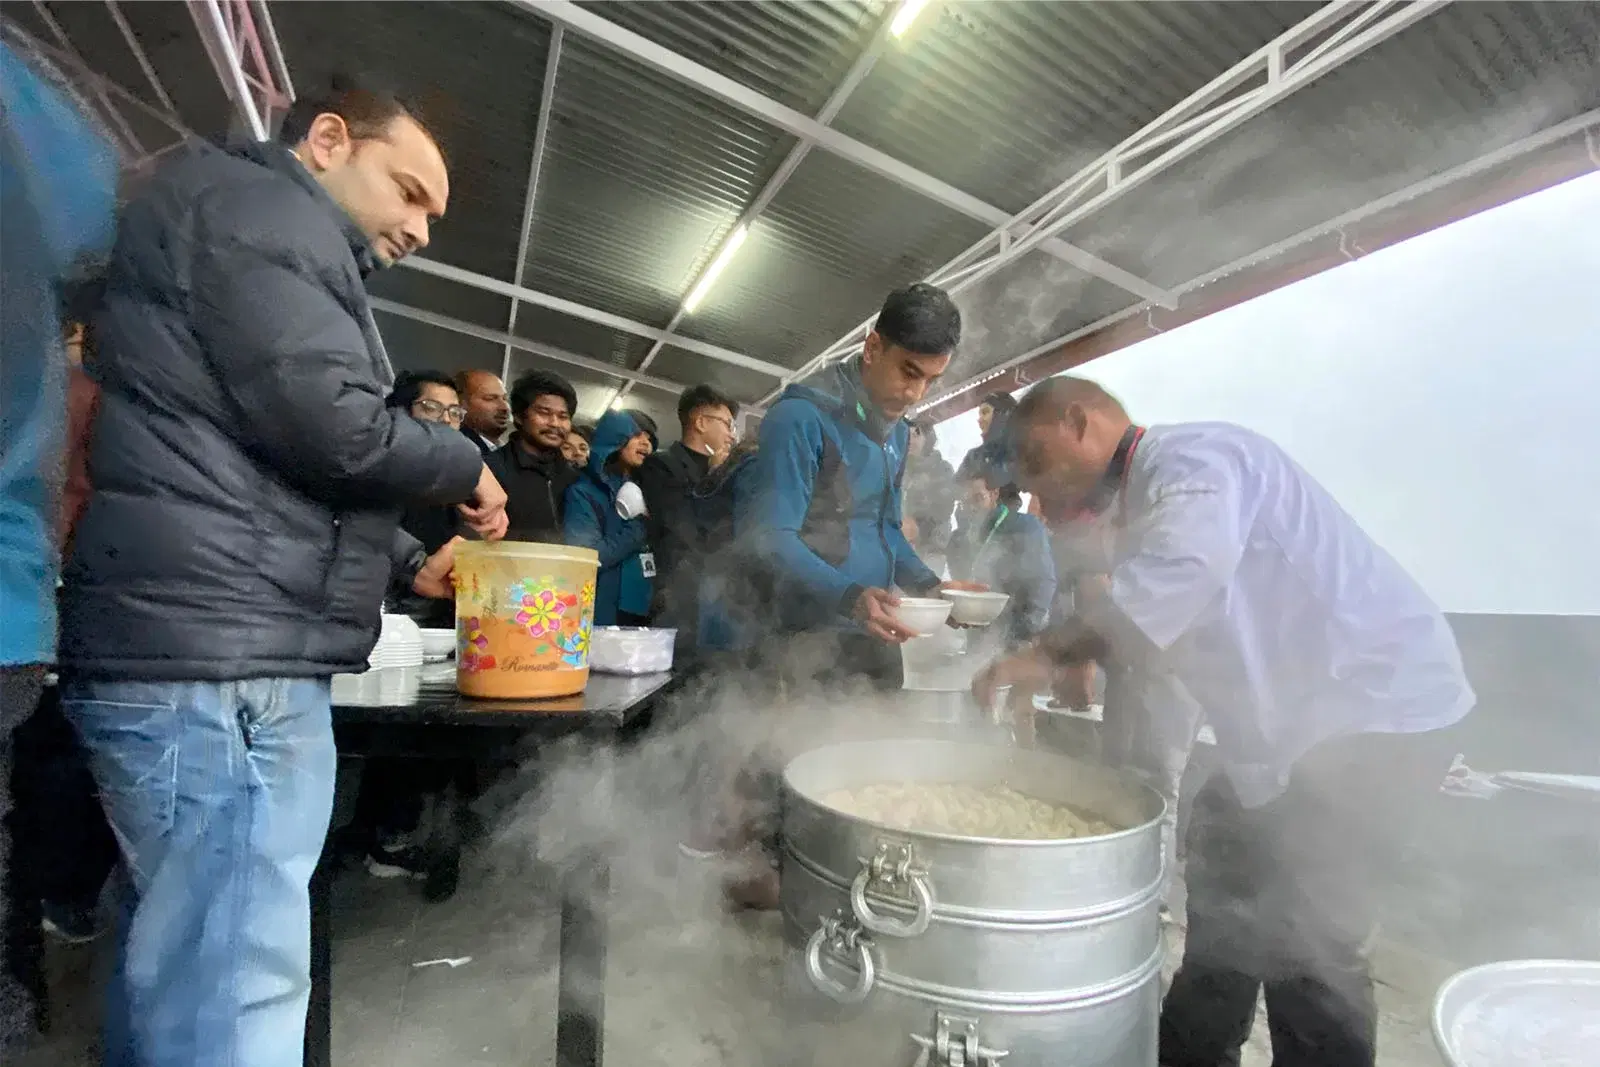 A person serving hot momos from steamers with employees lined up to enjoy the delicious treat.